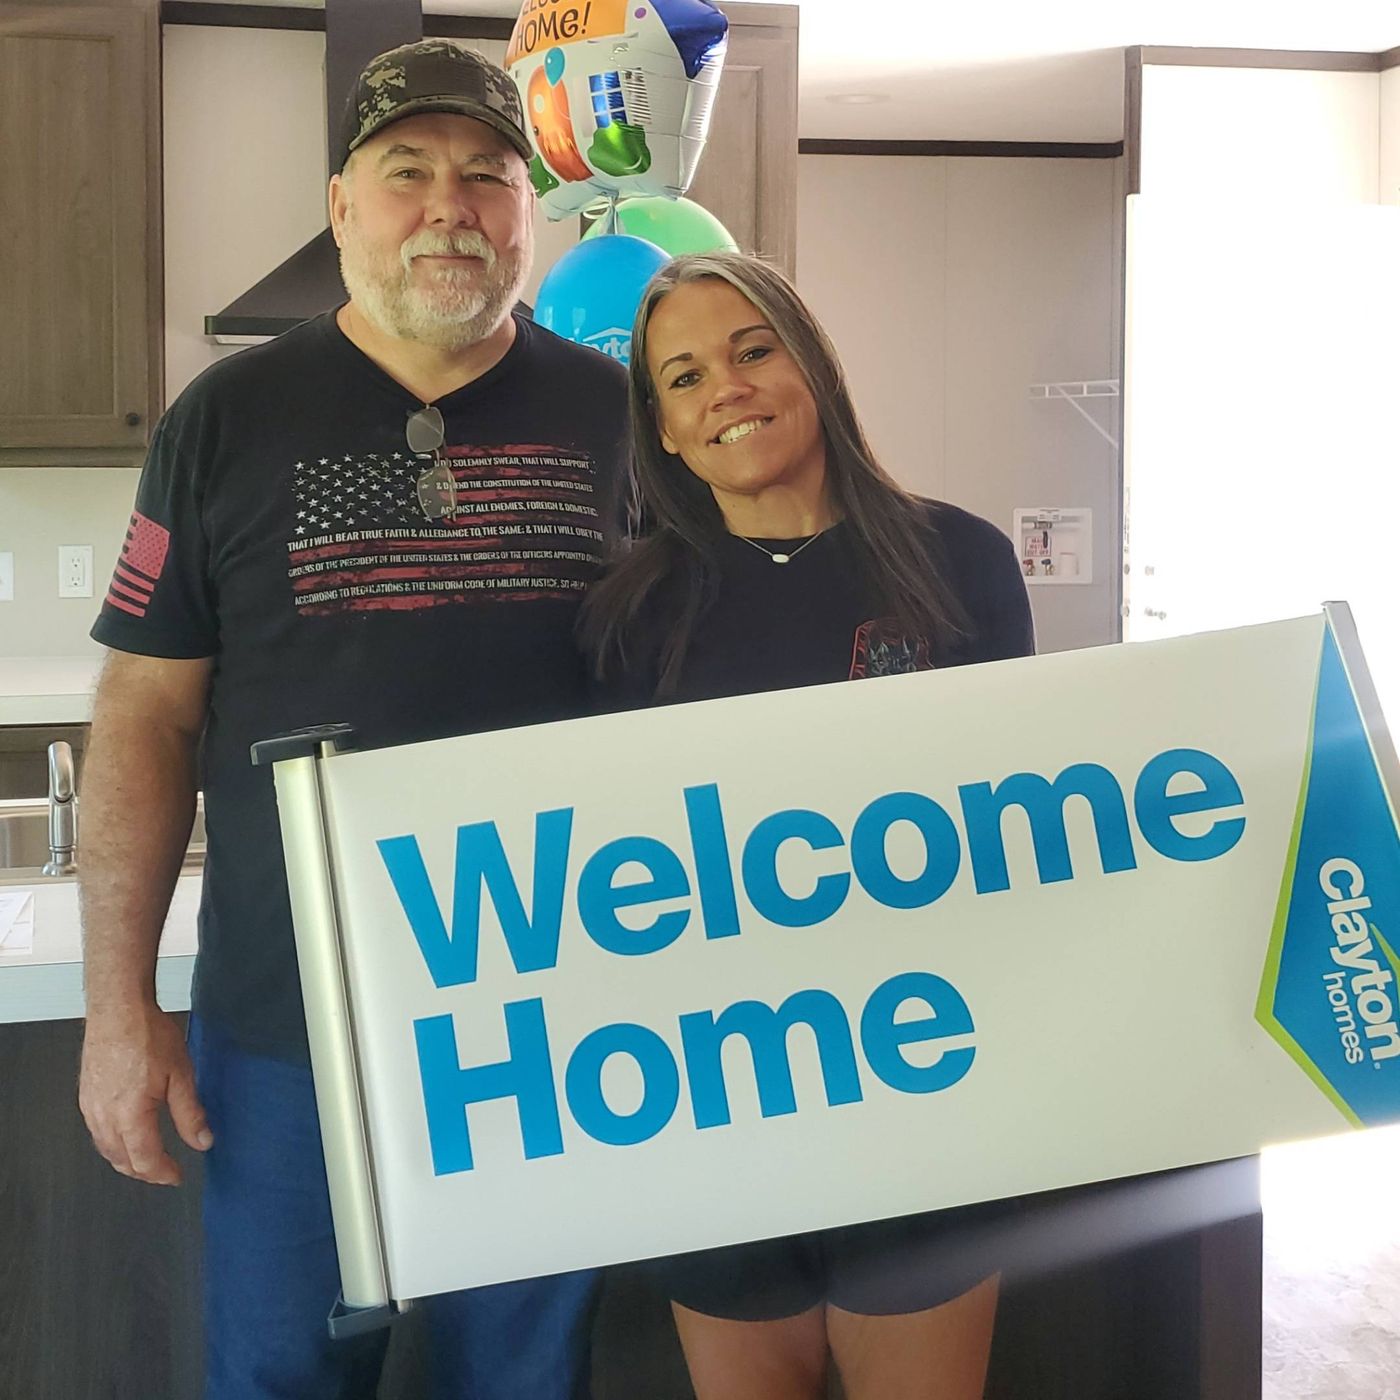 KEVIN S. welcome home image